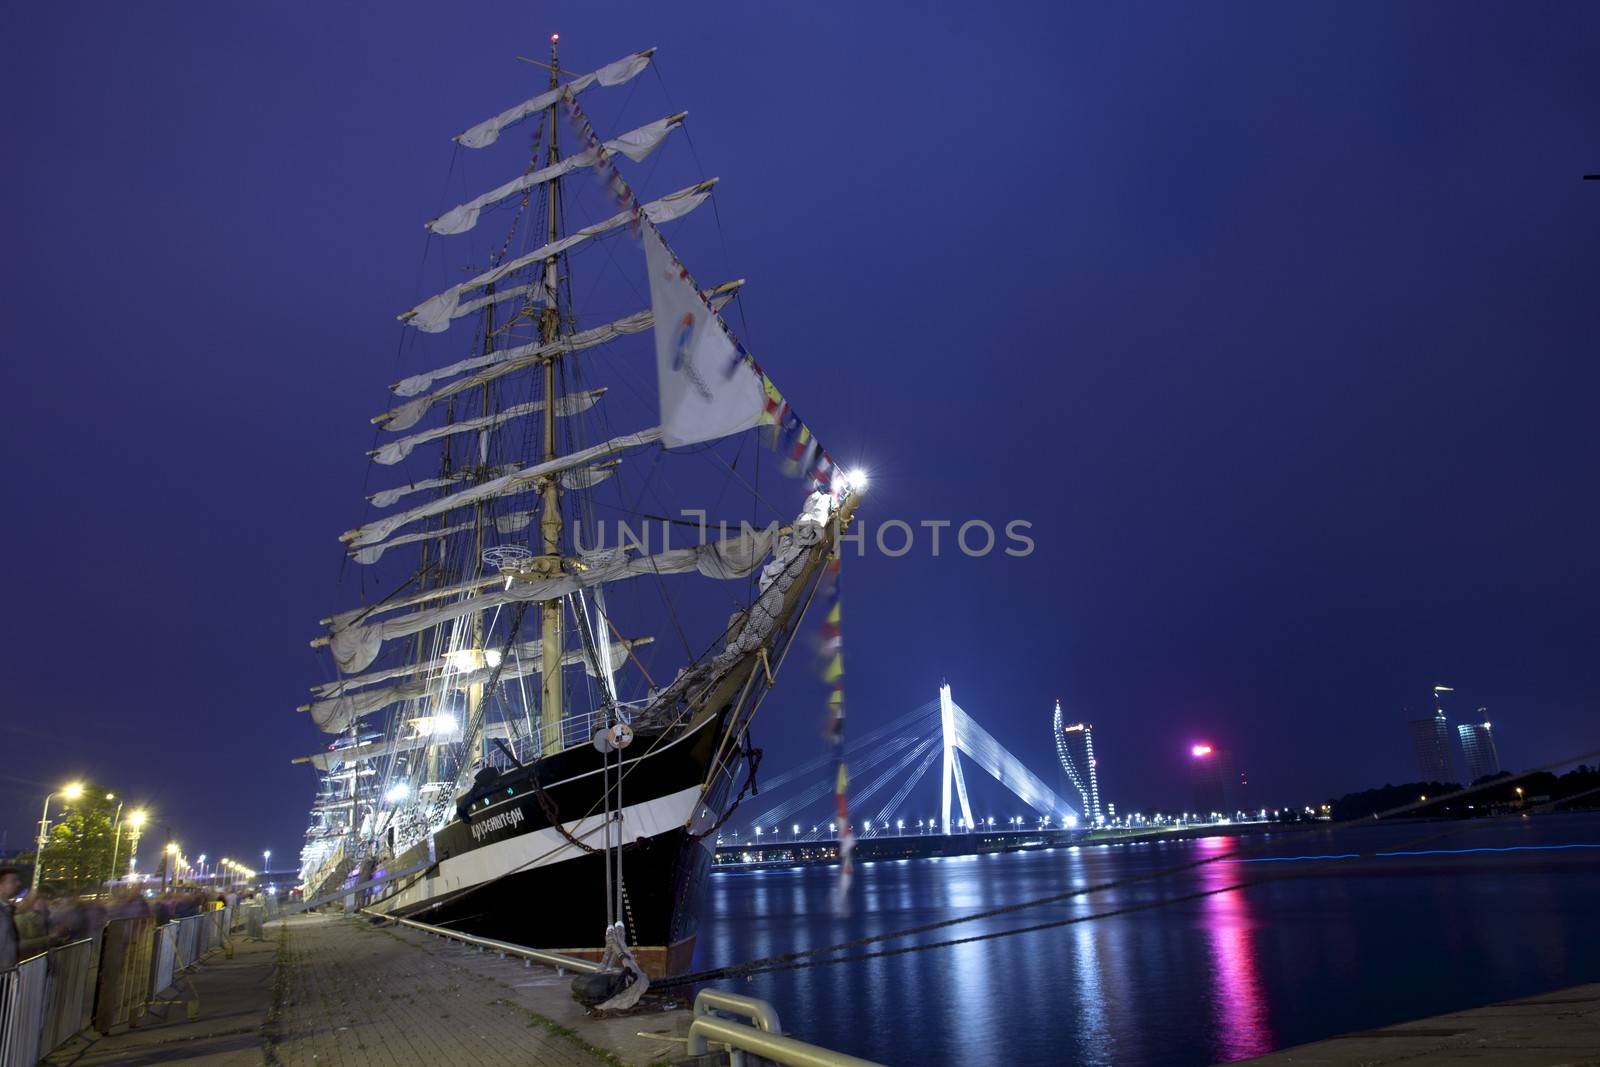 Illuminated The tall ships races ships in Riga by ints